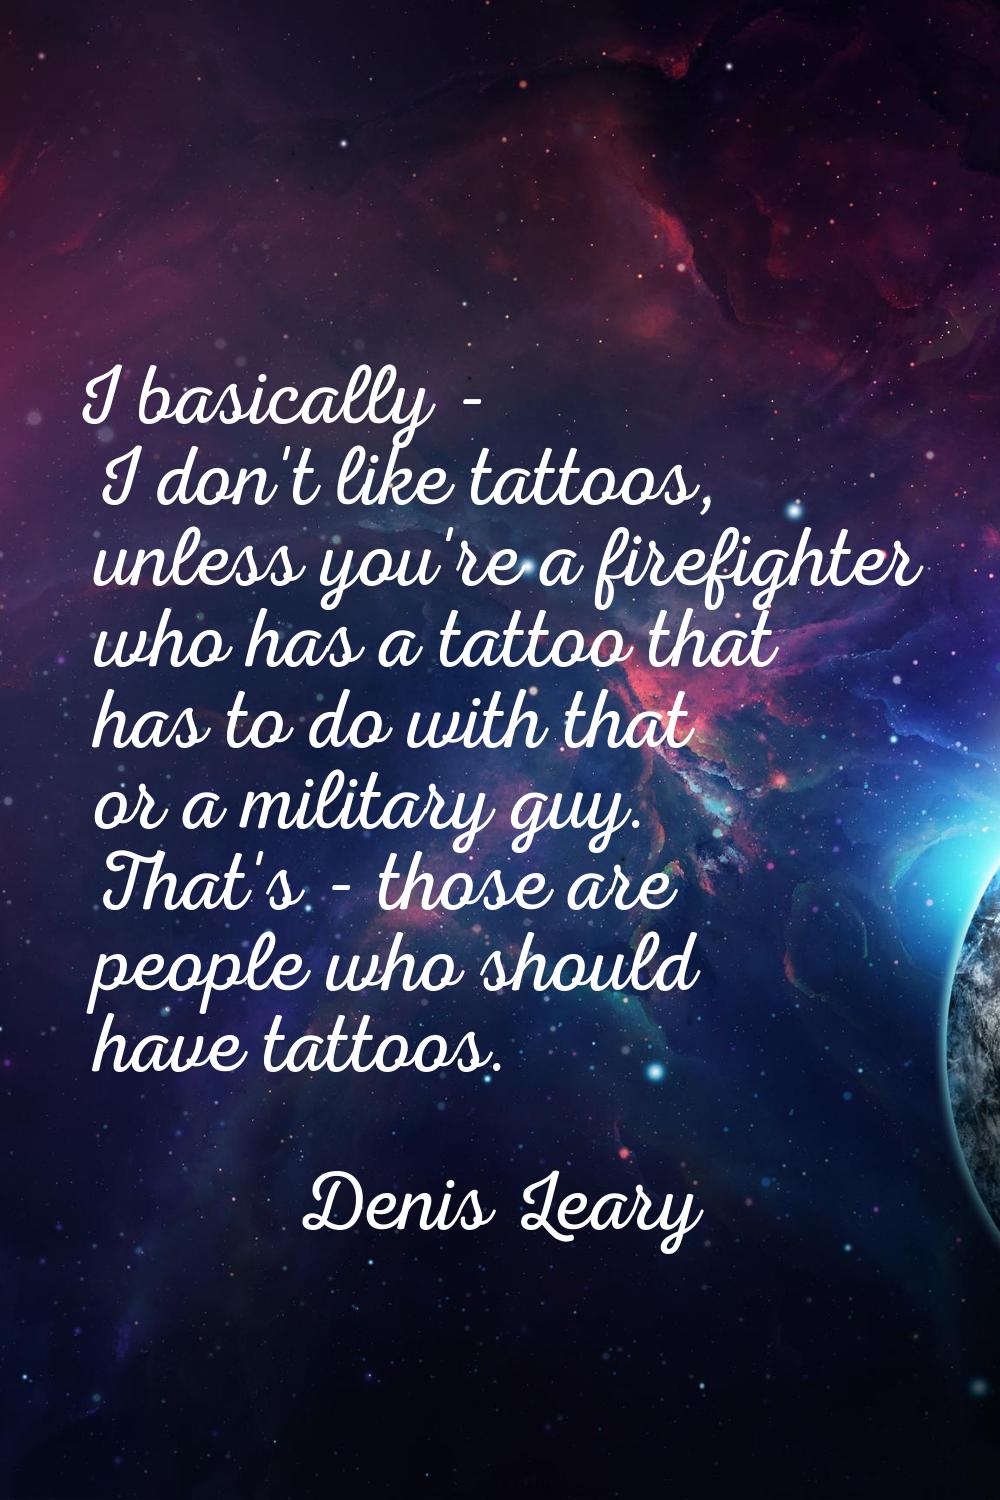 I basically - I don't like tattoos, unless you're a firefighter who has a tattoo that has to do wit